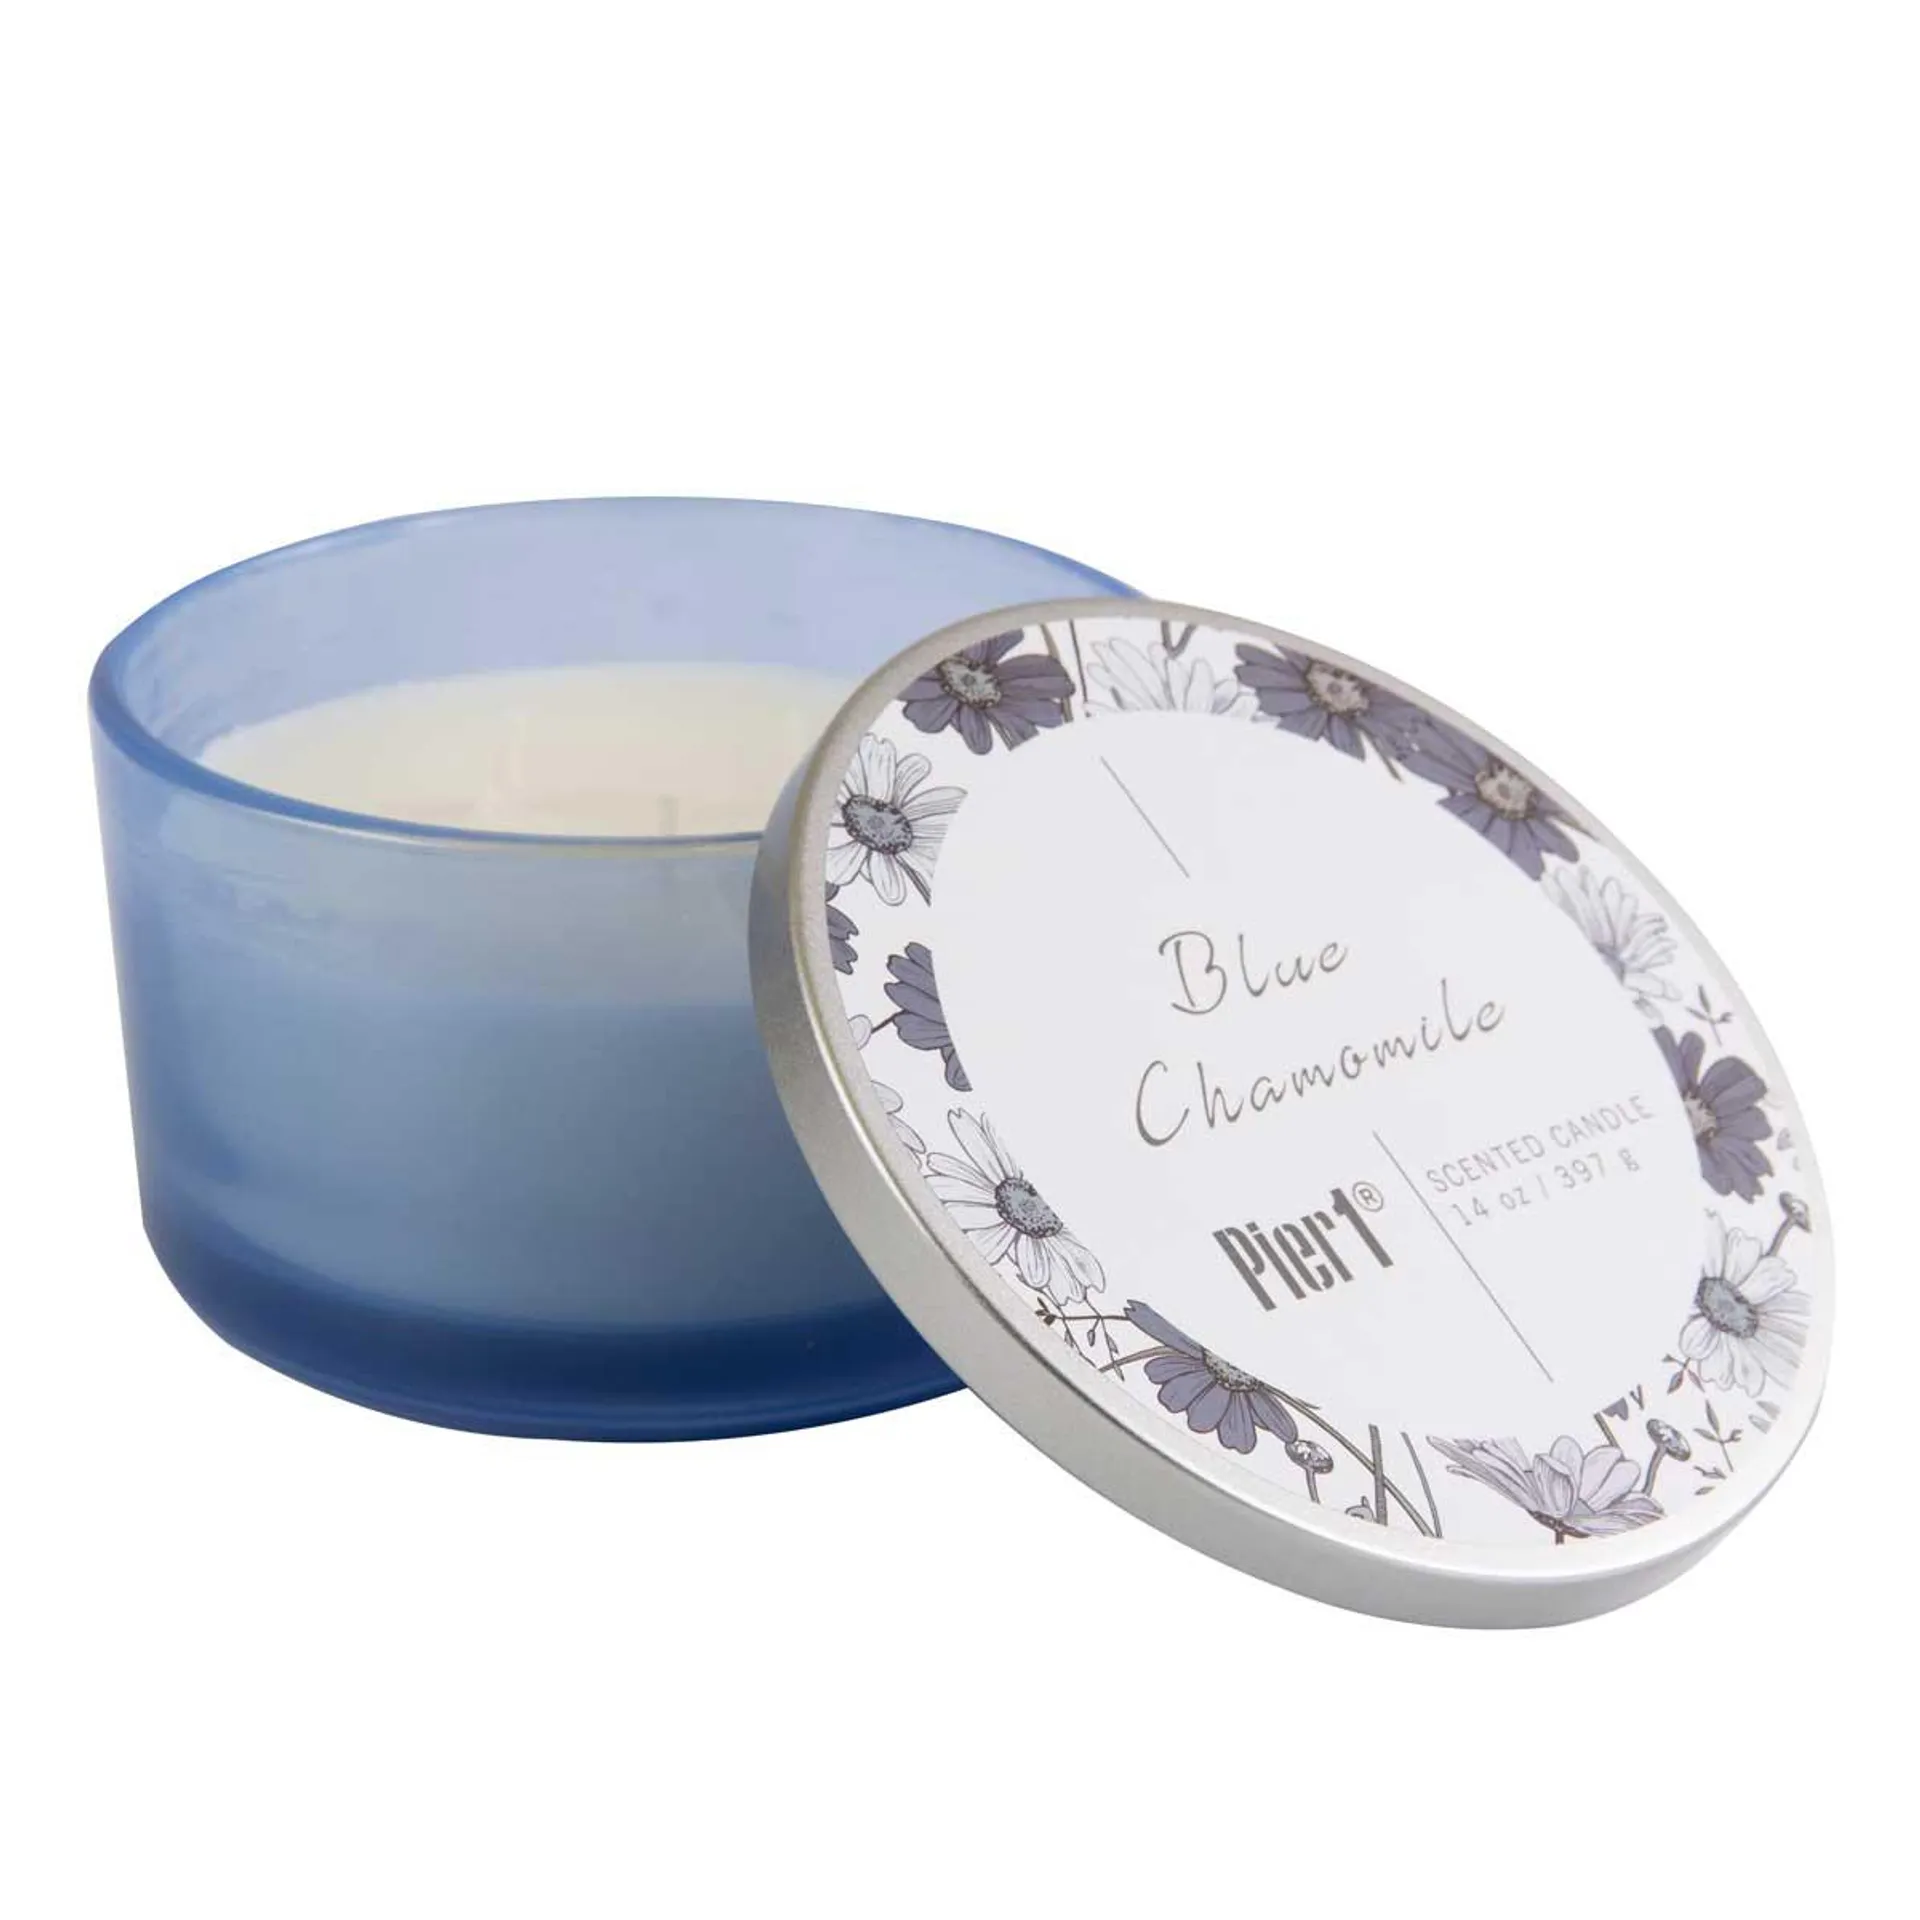 Pier 1 Blue Chamomile 14oz Filled 3-Wick Candle